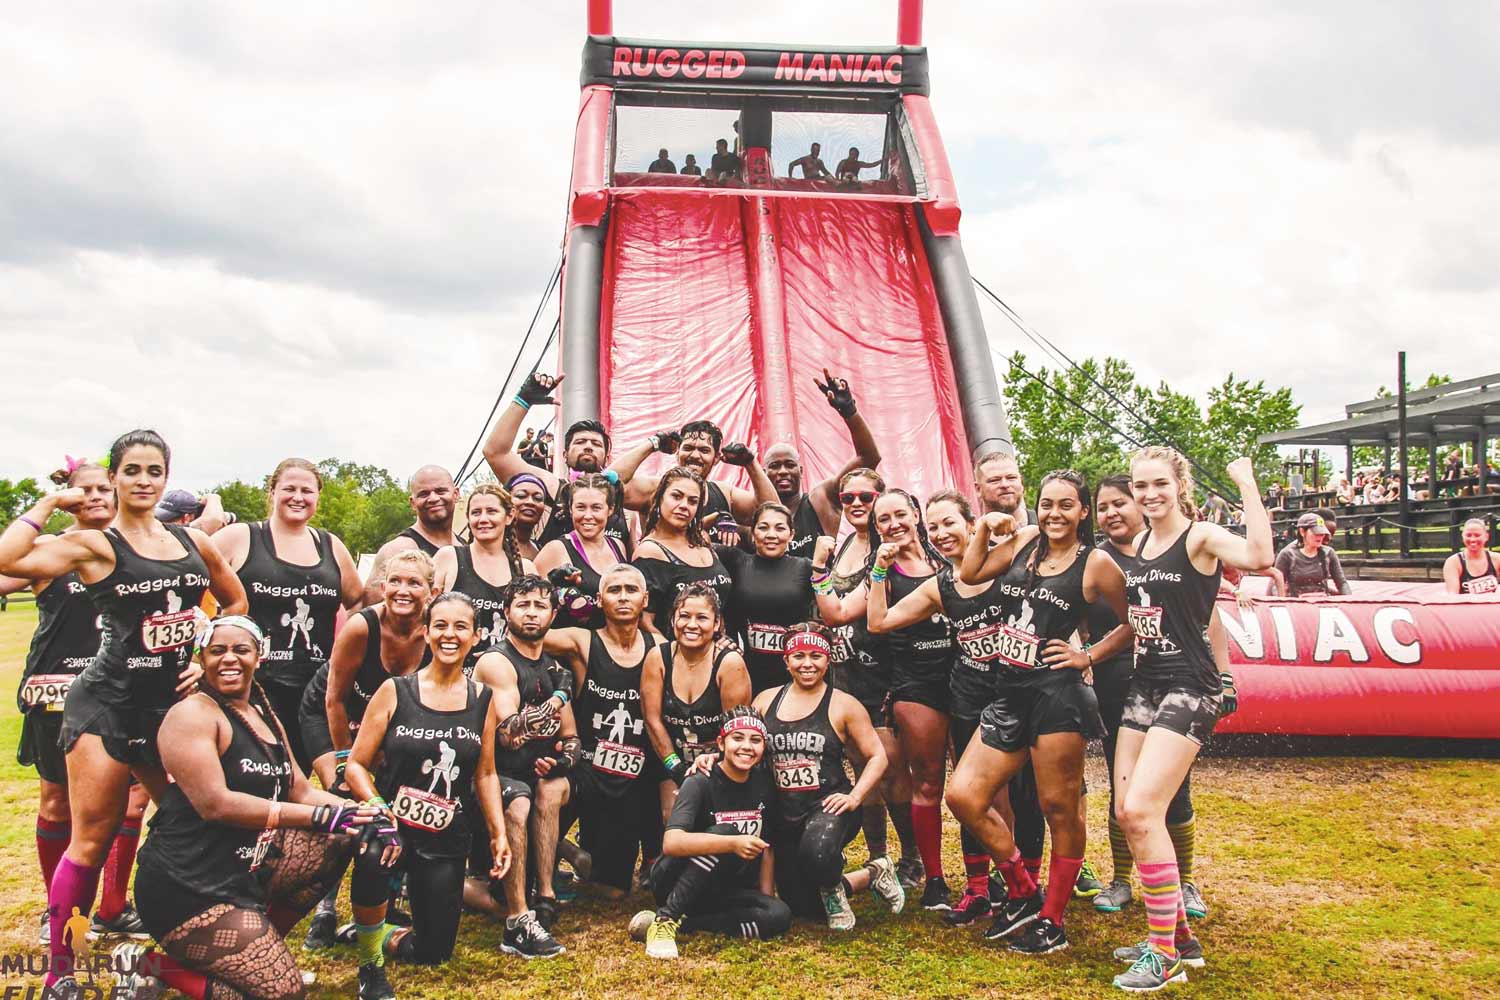 Obstacle Course Races to Join in 2020 - International OCR Races to Join in 2020